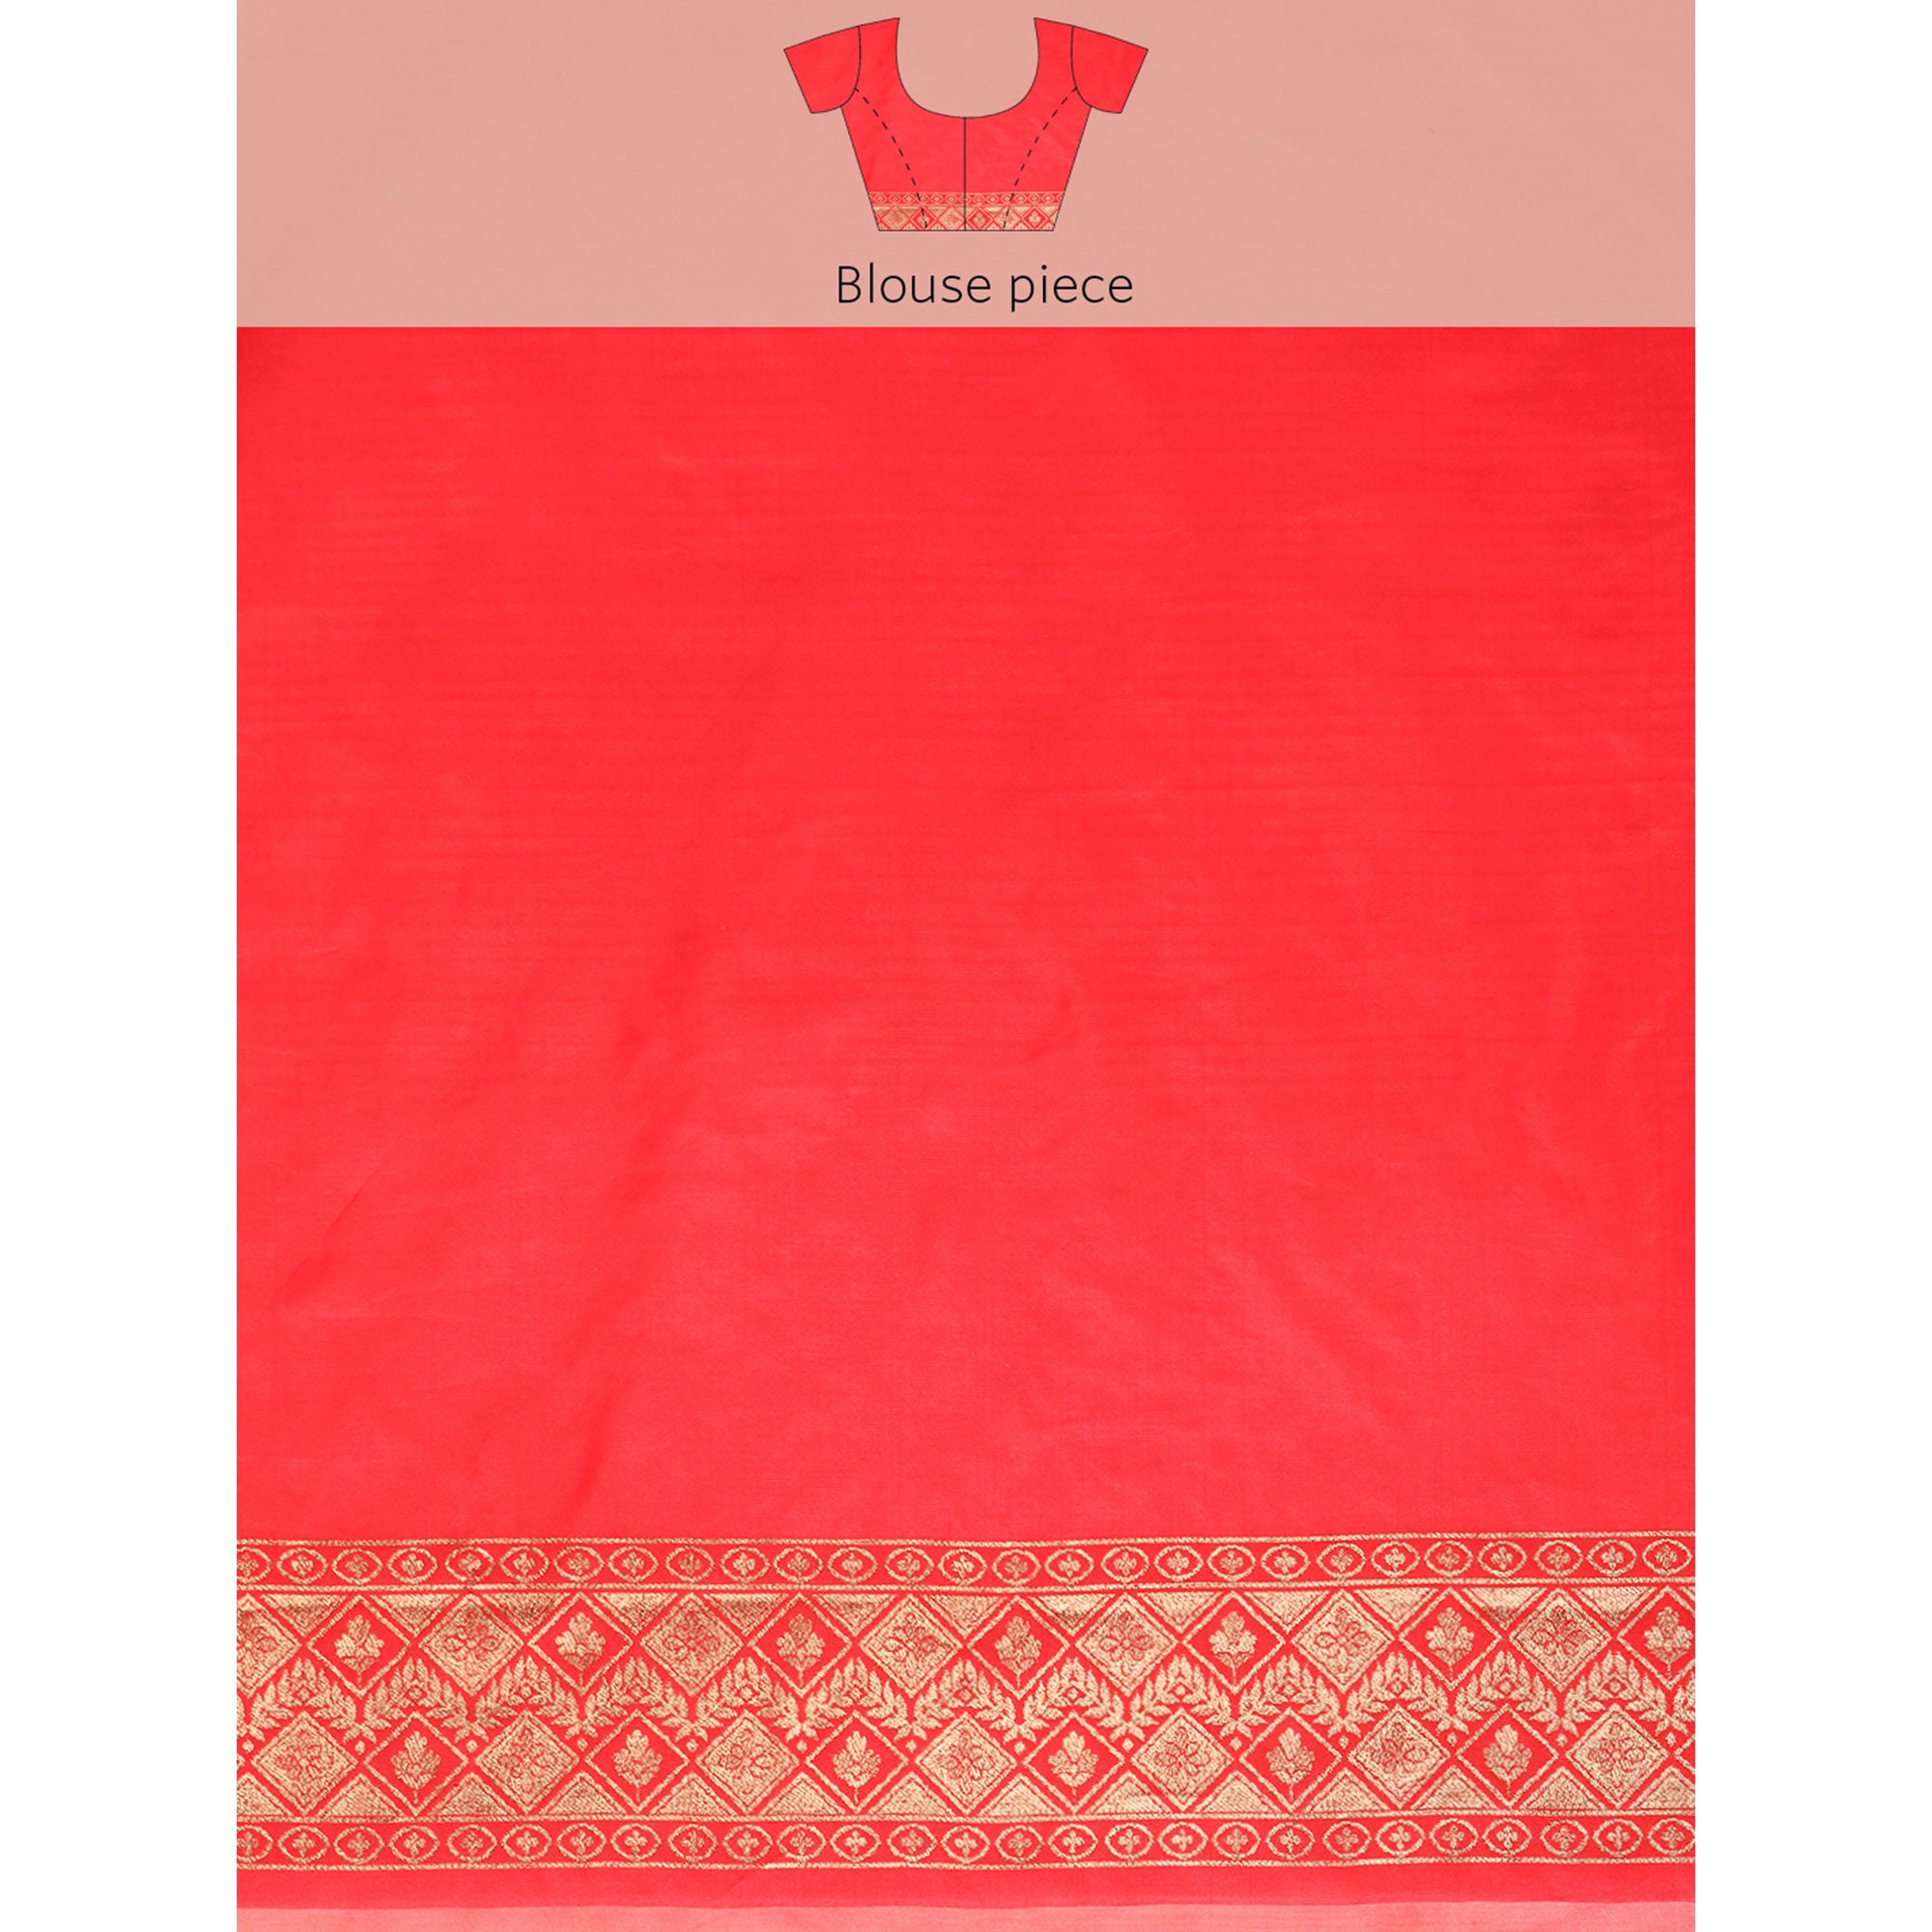 Red Floral Woven Organza Silk Saree With Tassels